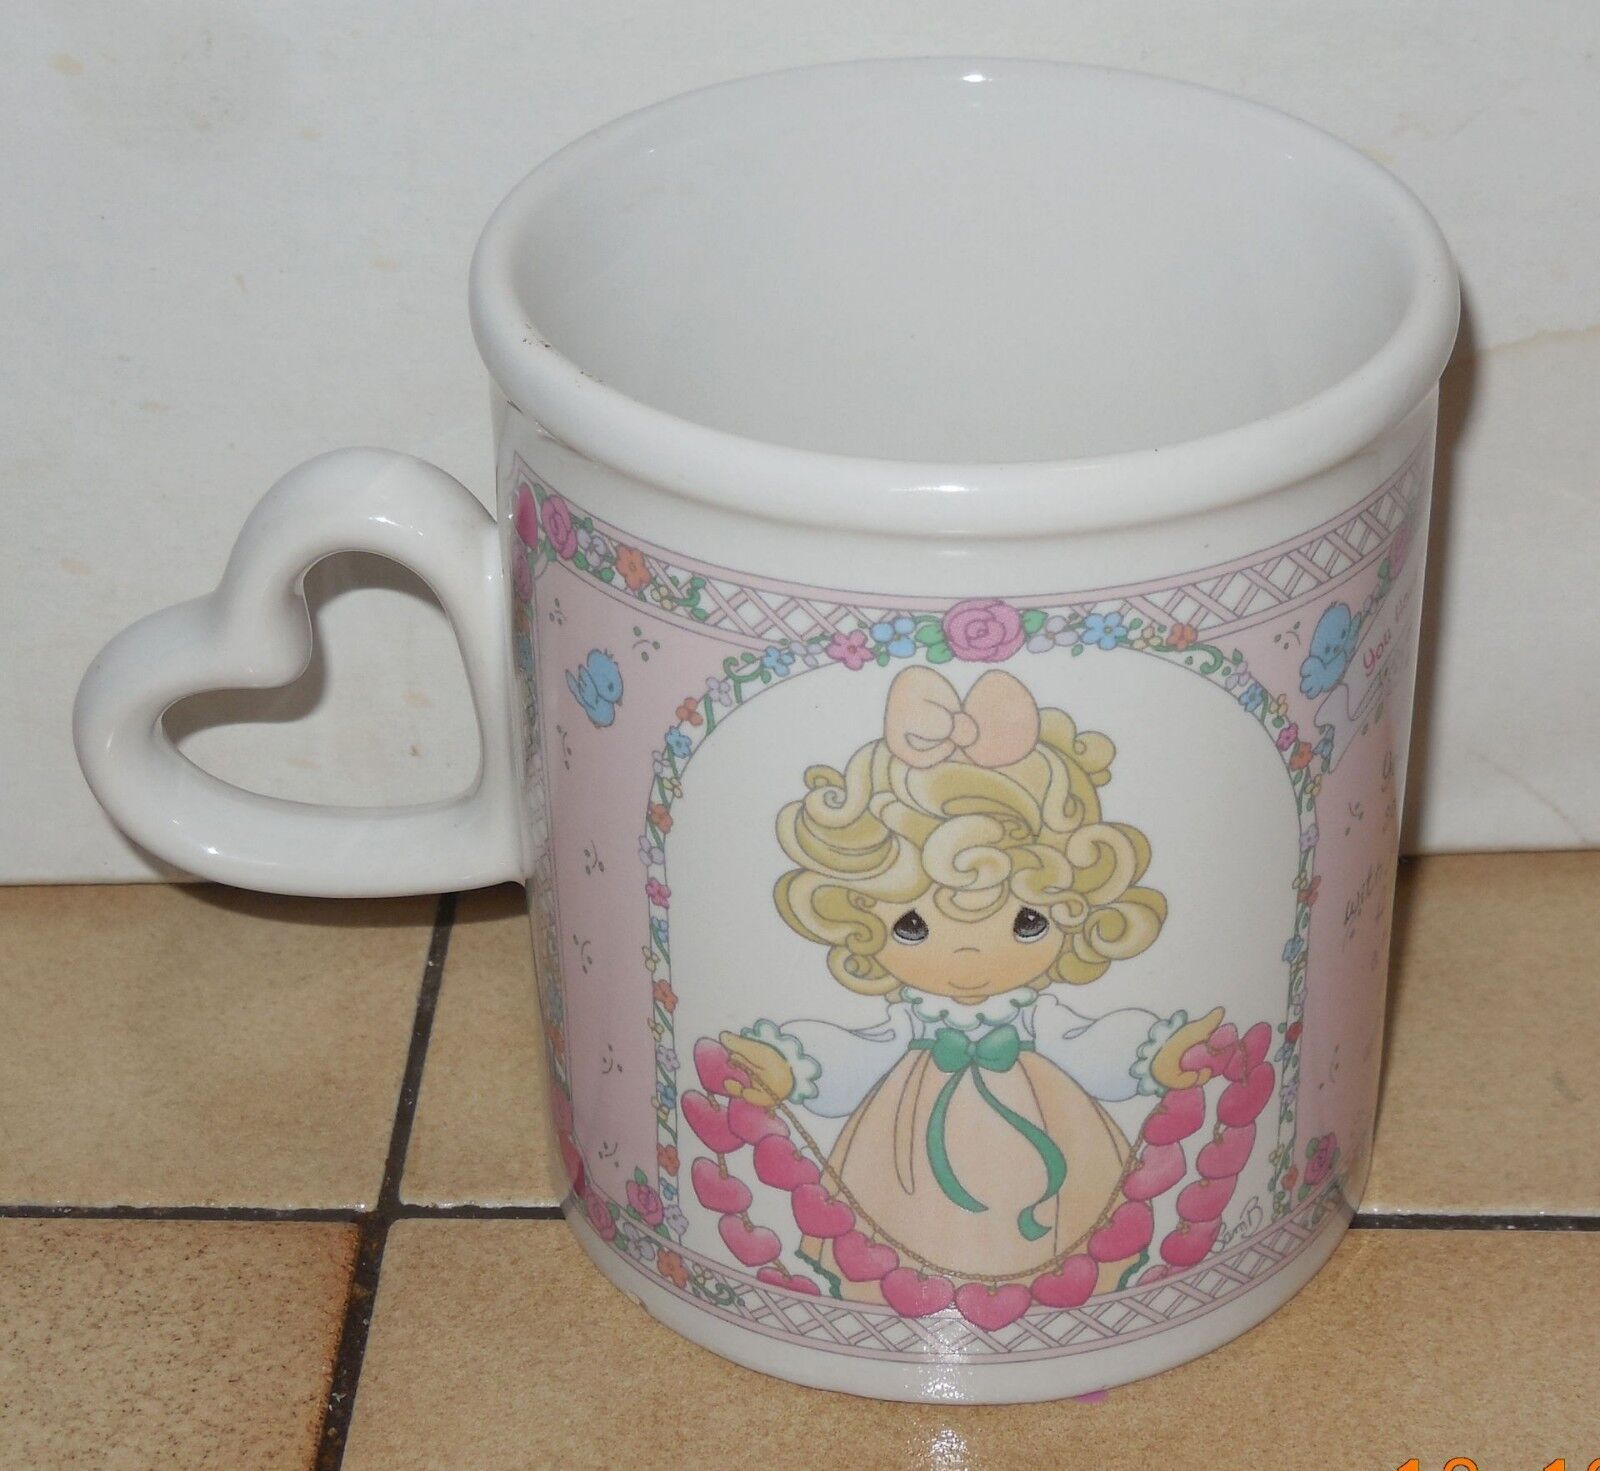 Coffee Mug Cup Precious Moments "You have Touched So Many Hearts" Ceramic - $9.55